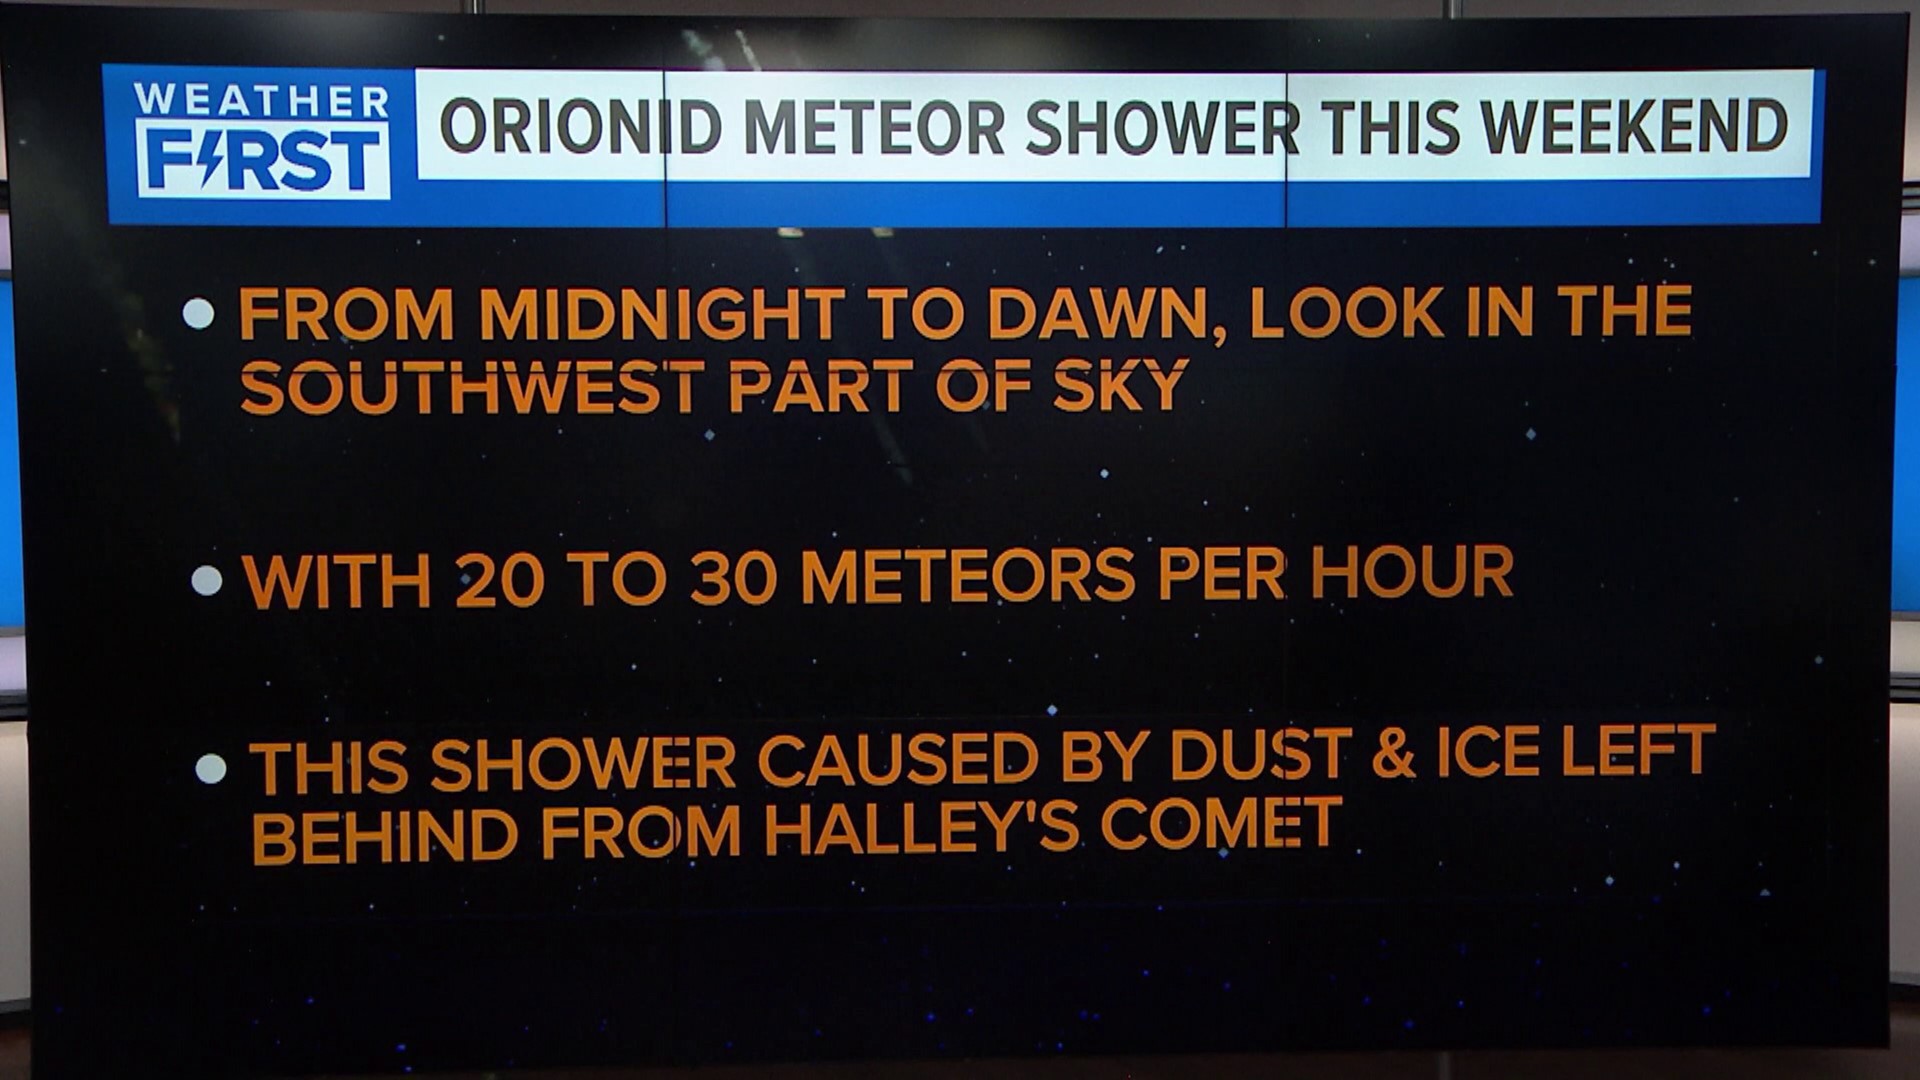 The Orionid meteor shower will reach its peak this weekend, Oct. 20-21. Here's how you can see it in St. Louis.